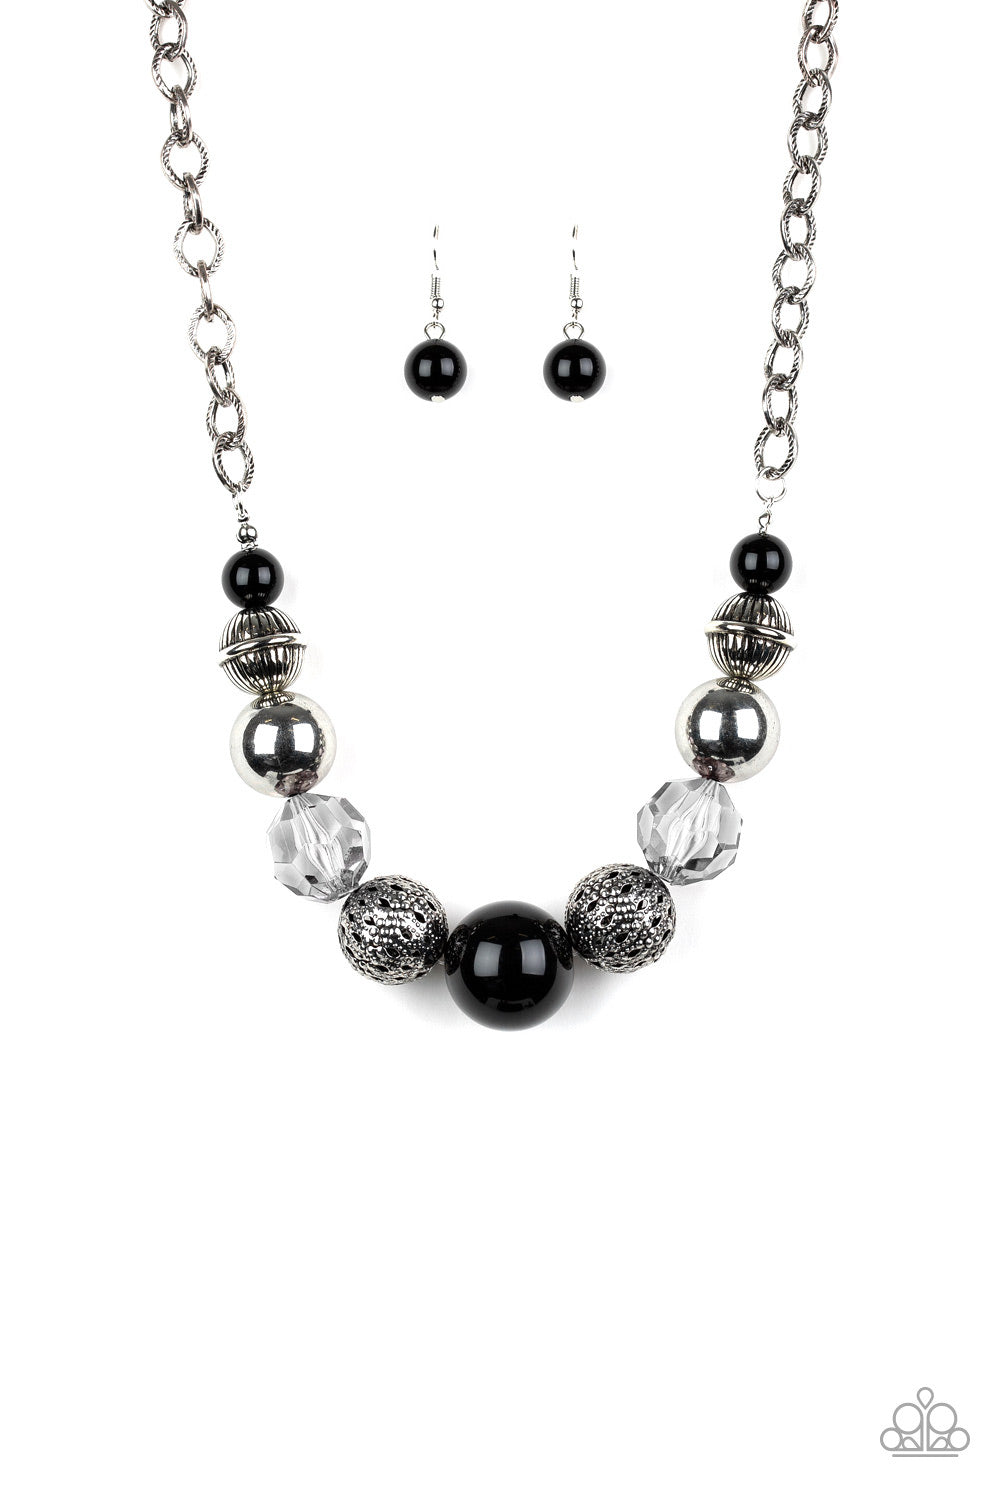 Sugar, Sugar - Black and Silver Bead Necklace - Paparazzi Accessories - A collection of antiqued silver beads, smoky crystal-like beads, and oversized black beads are threaded along an invisible wire below the collar. Textured in linear patterns, an antiqued silver chain attaches to the colorful compilation for a statement-making stylish necklace.  Bejeweled Accessories By Kristie - Trendy fashion jewelry for everyone -